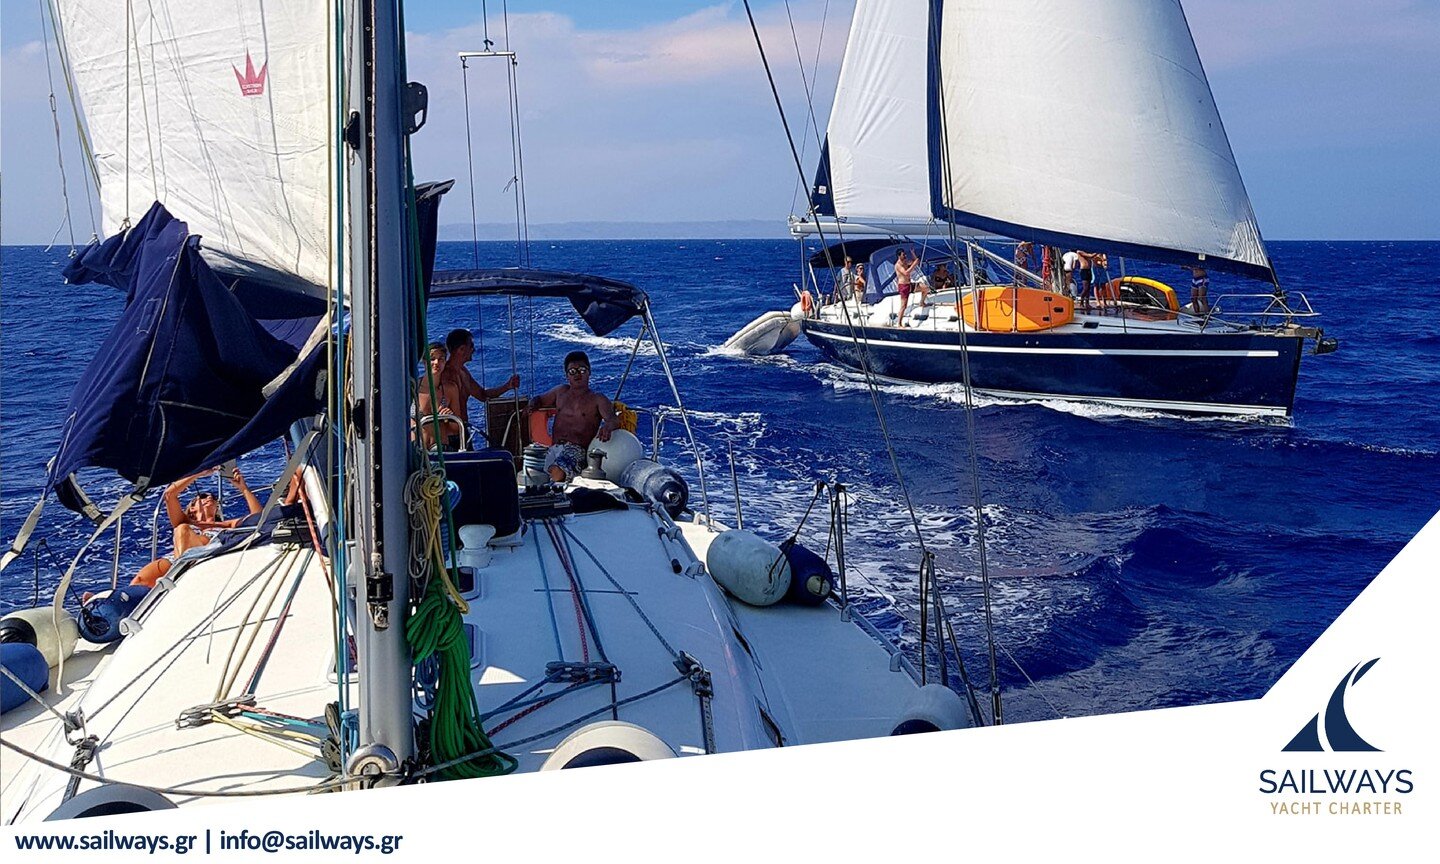 ⛵ Wherever we want to go, we go&hellip; that&rsquo;s what a yacht is, you know!

https://sailways.gr/
info@sailways.gr

#sailing #sailingyacht #sailinglife #sailinginstagram #sailor #yachting #yacht #yachtlife #visitgreece #exploregreece #boating #bo